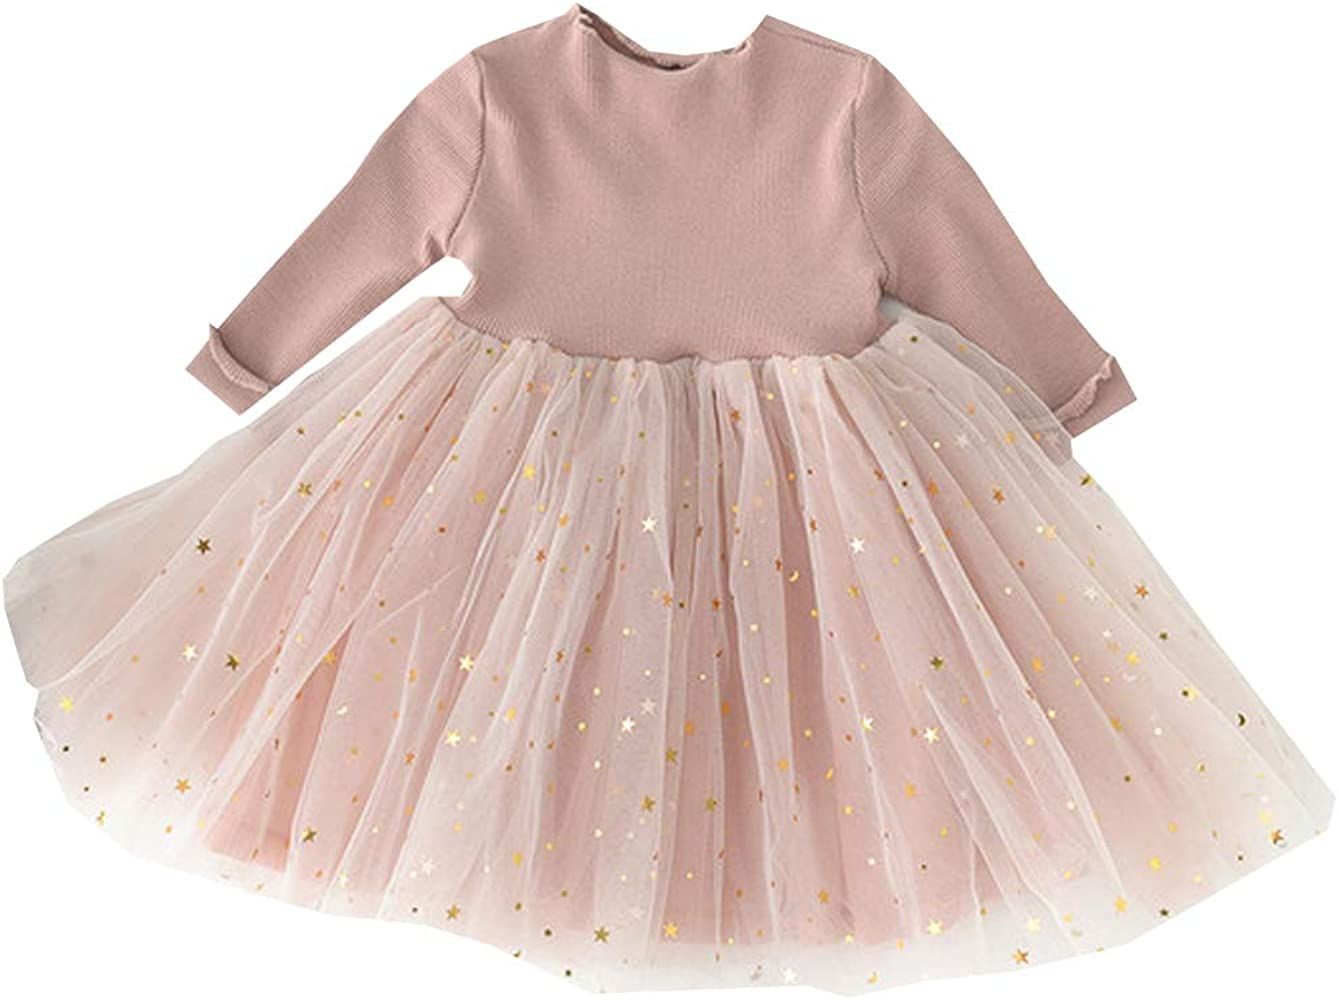 Infant Toddler Baby Girl Spring Fall Clothes Knit Long Sleeve Tutu Dress Fluffy Stars Tulle Dress Pr | Amazon (US)